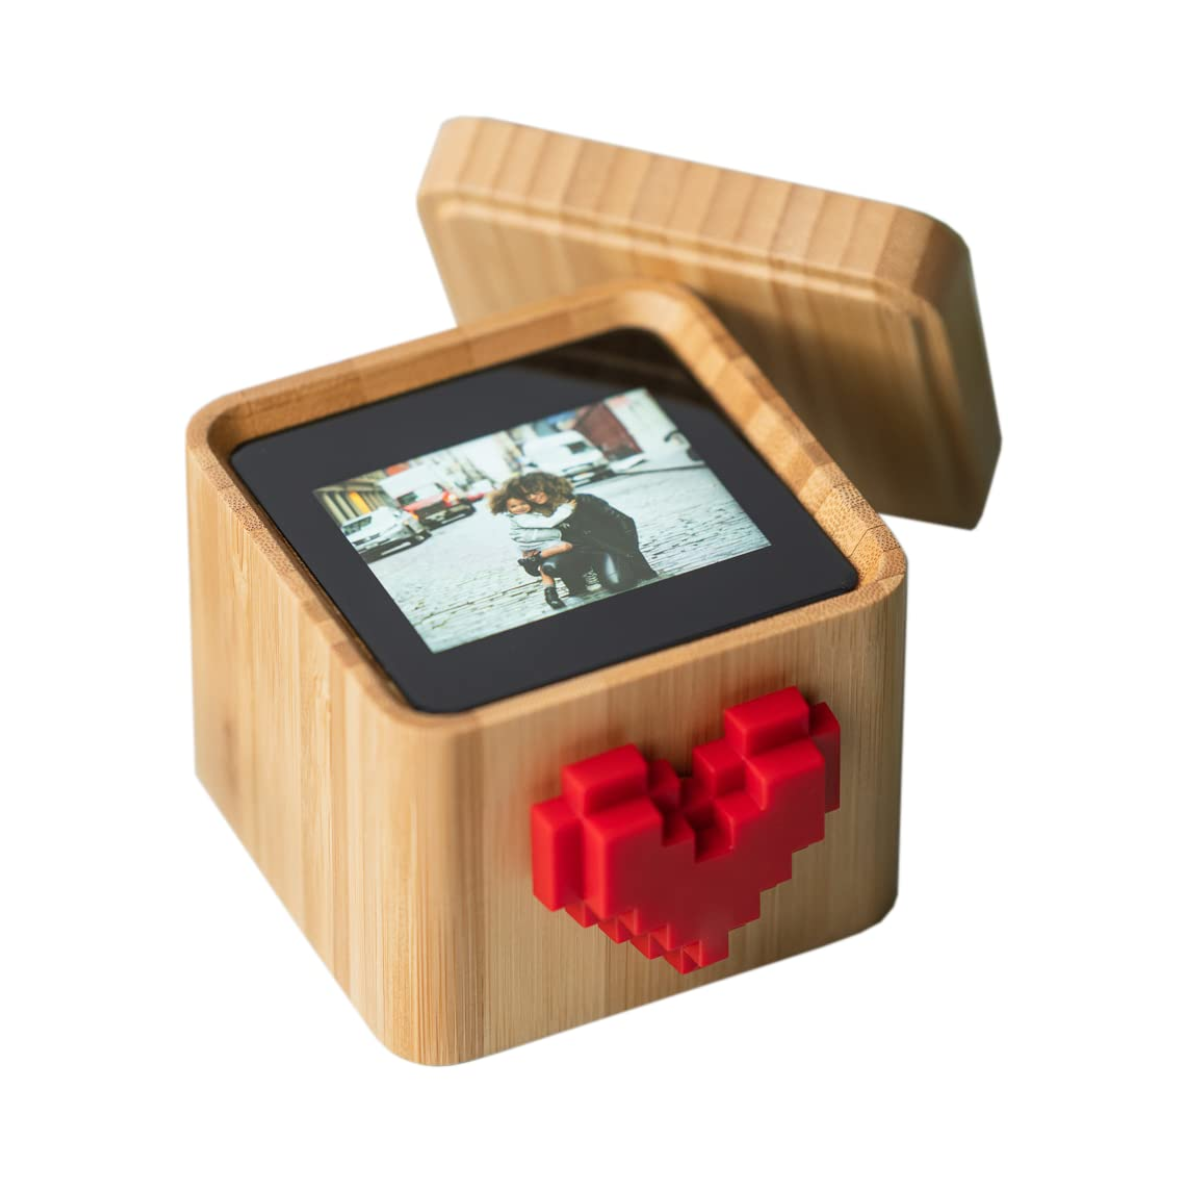 4. Surprise and Delight Your Loved One with a Unique Lovebox Spinning Heart Messenger